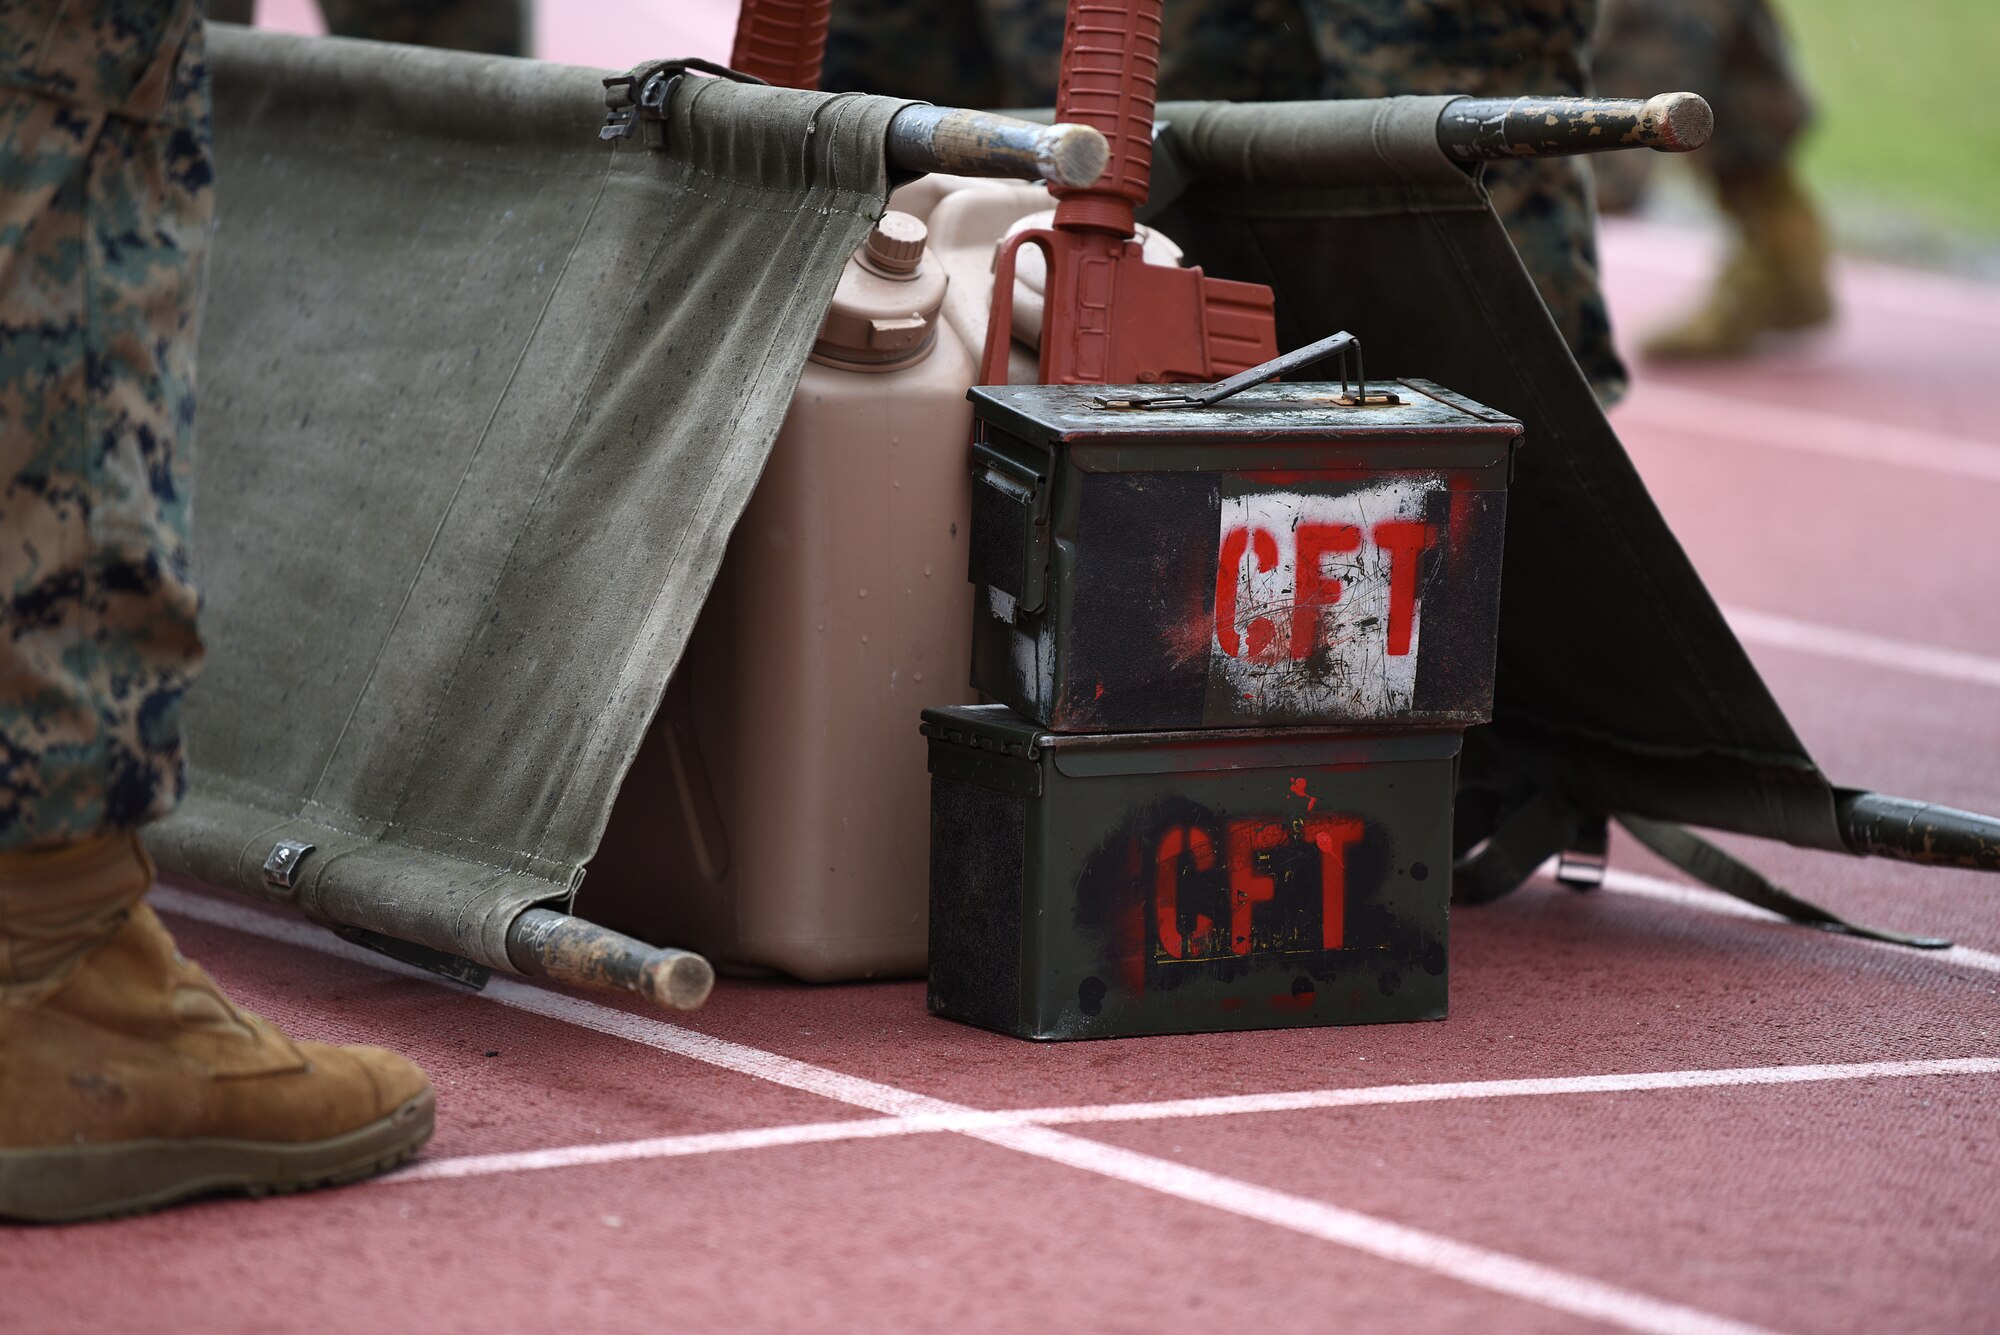 Equipment for the casualty evacuation race is placed on the Triangle Track during the 2nd Annual Warrior Day at Keesler Air Force Base, Mississippi, April 6, 2018. The race included carrying a team member on a stretcher, transporting ammo cans and water jugs. The event served to promote unit cohesion, camaraderie and small unit leadership.  (U.S. Air Force photo by Airman 1st Class Suzie Plotnikov)